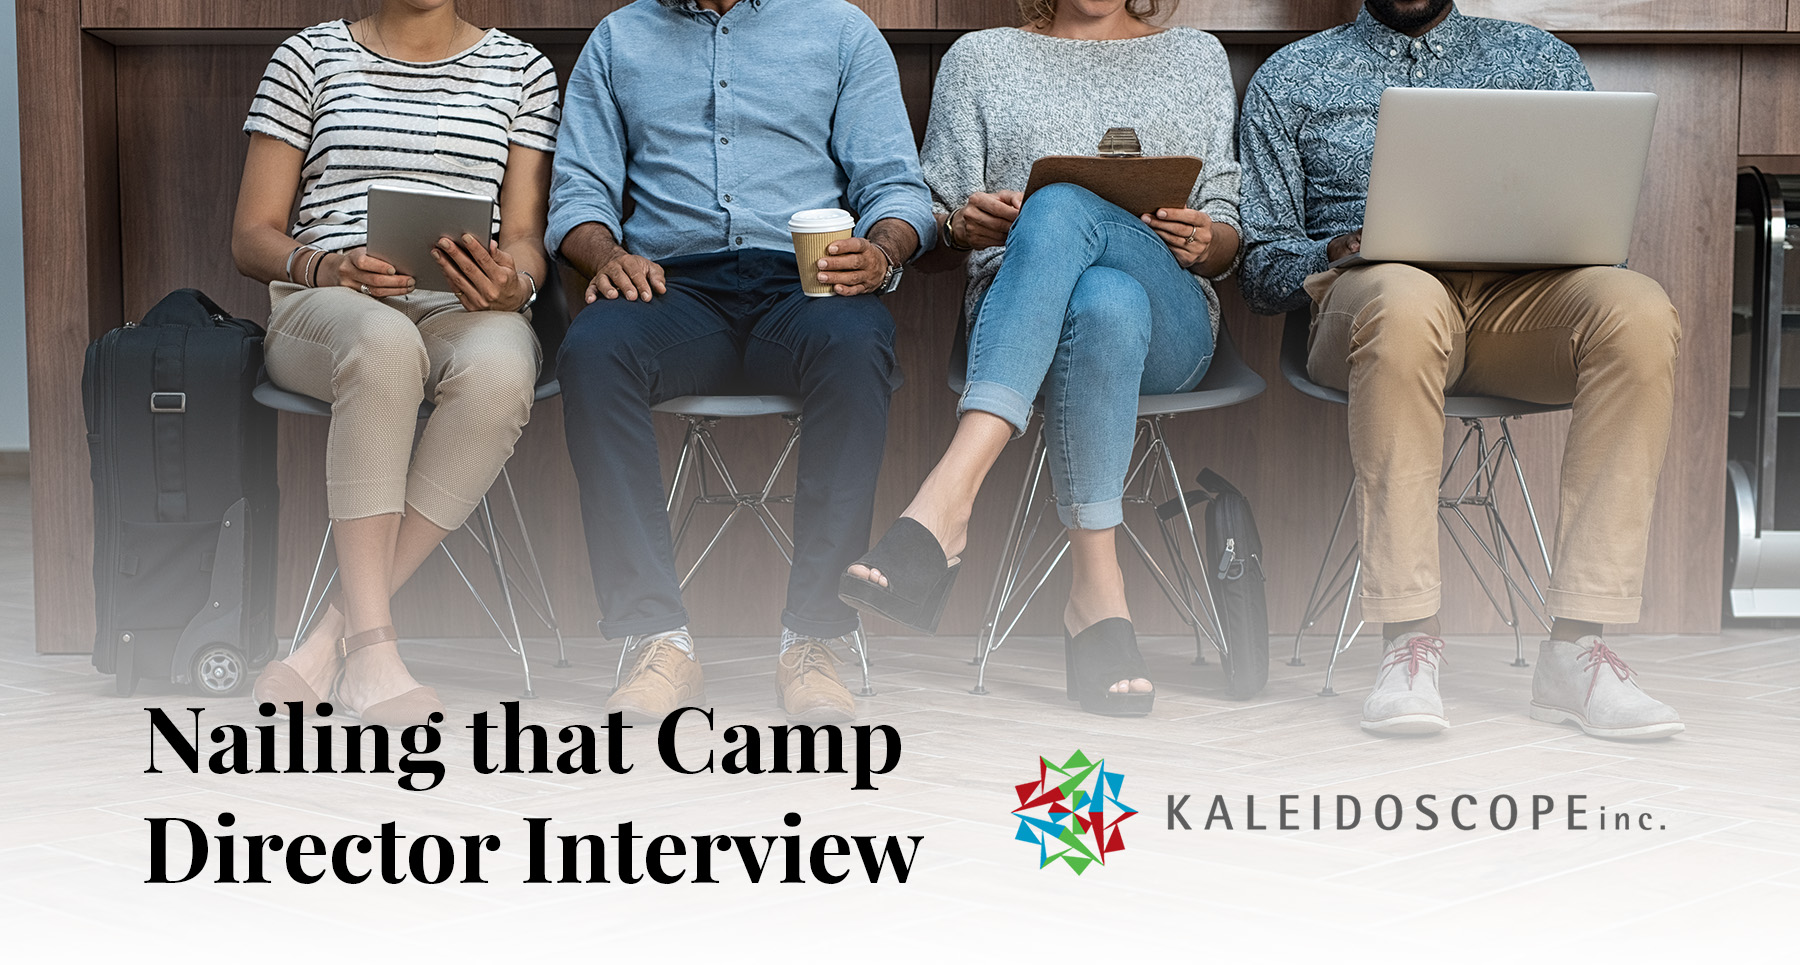 Nail Your Camp Director Interview